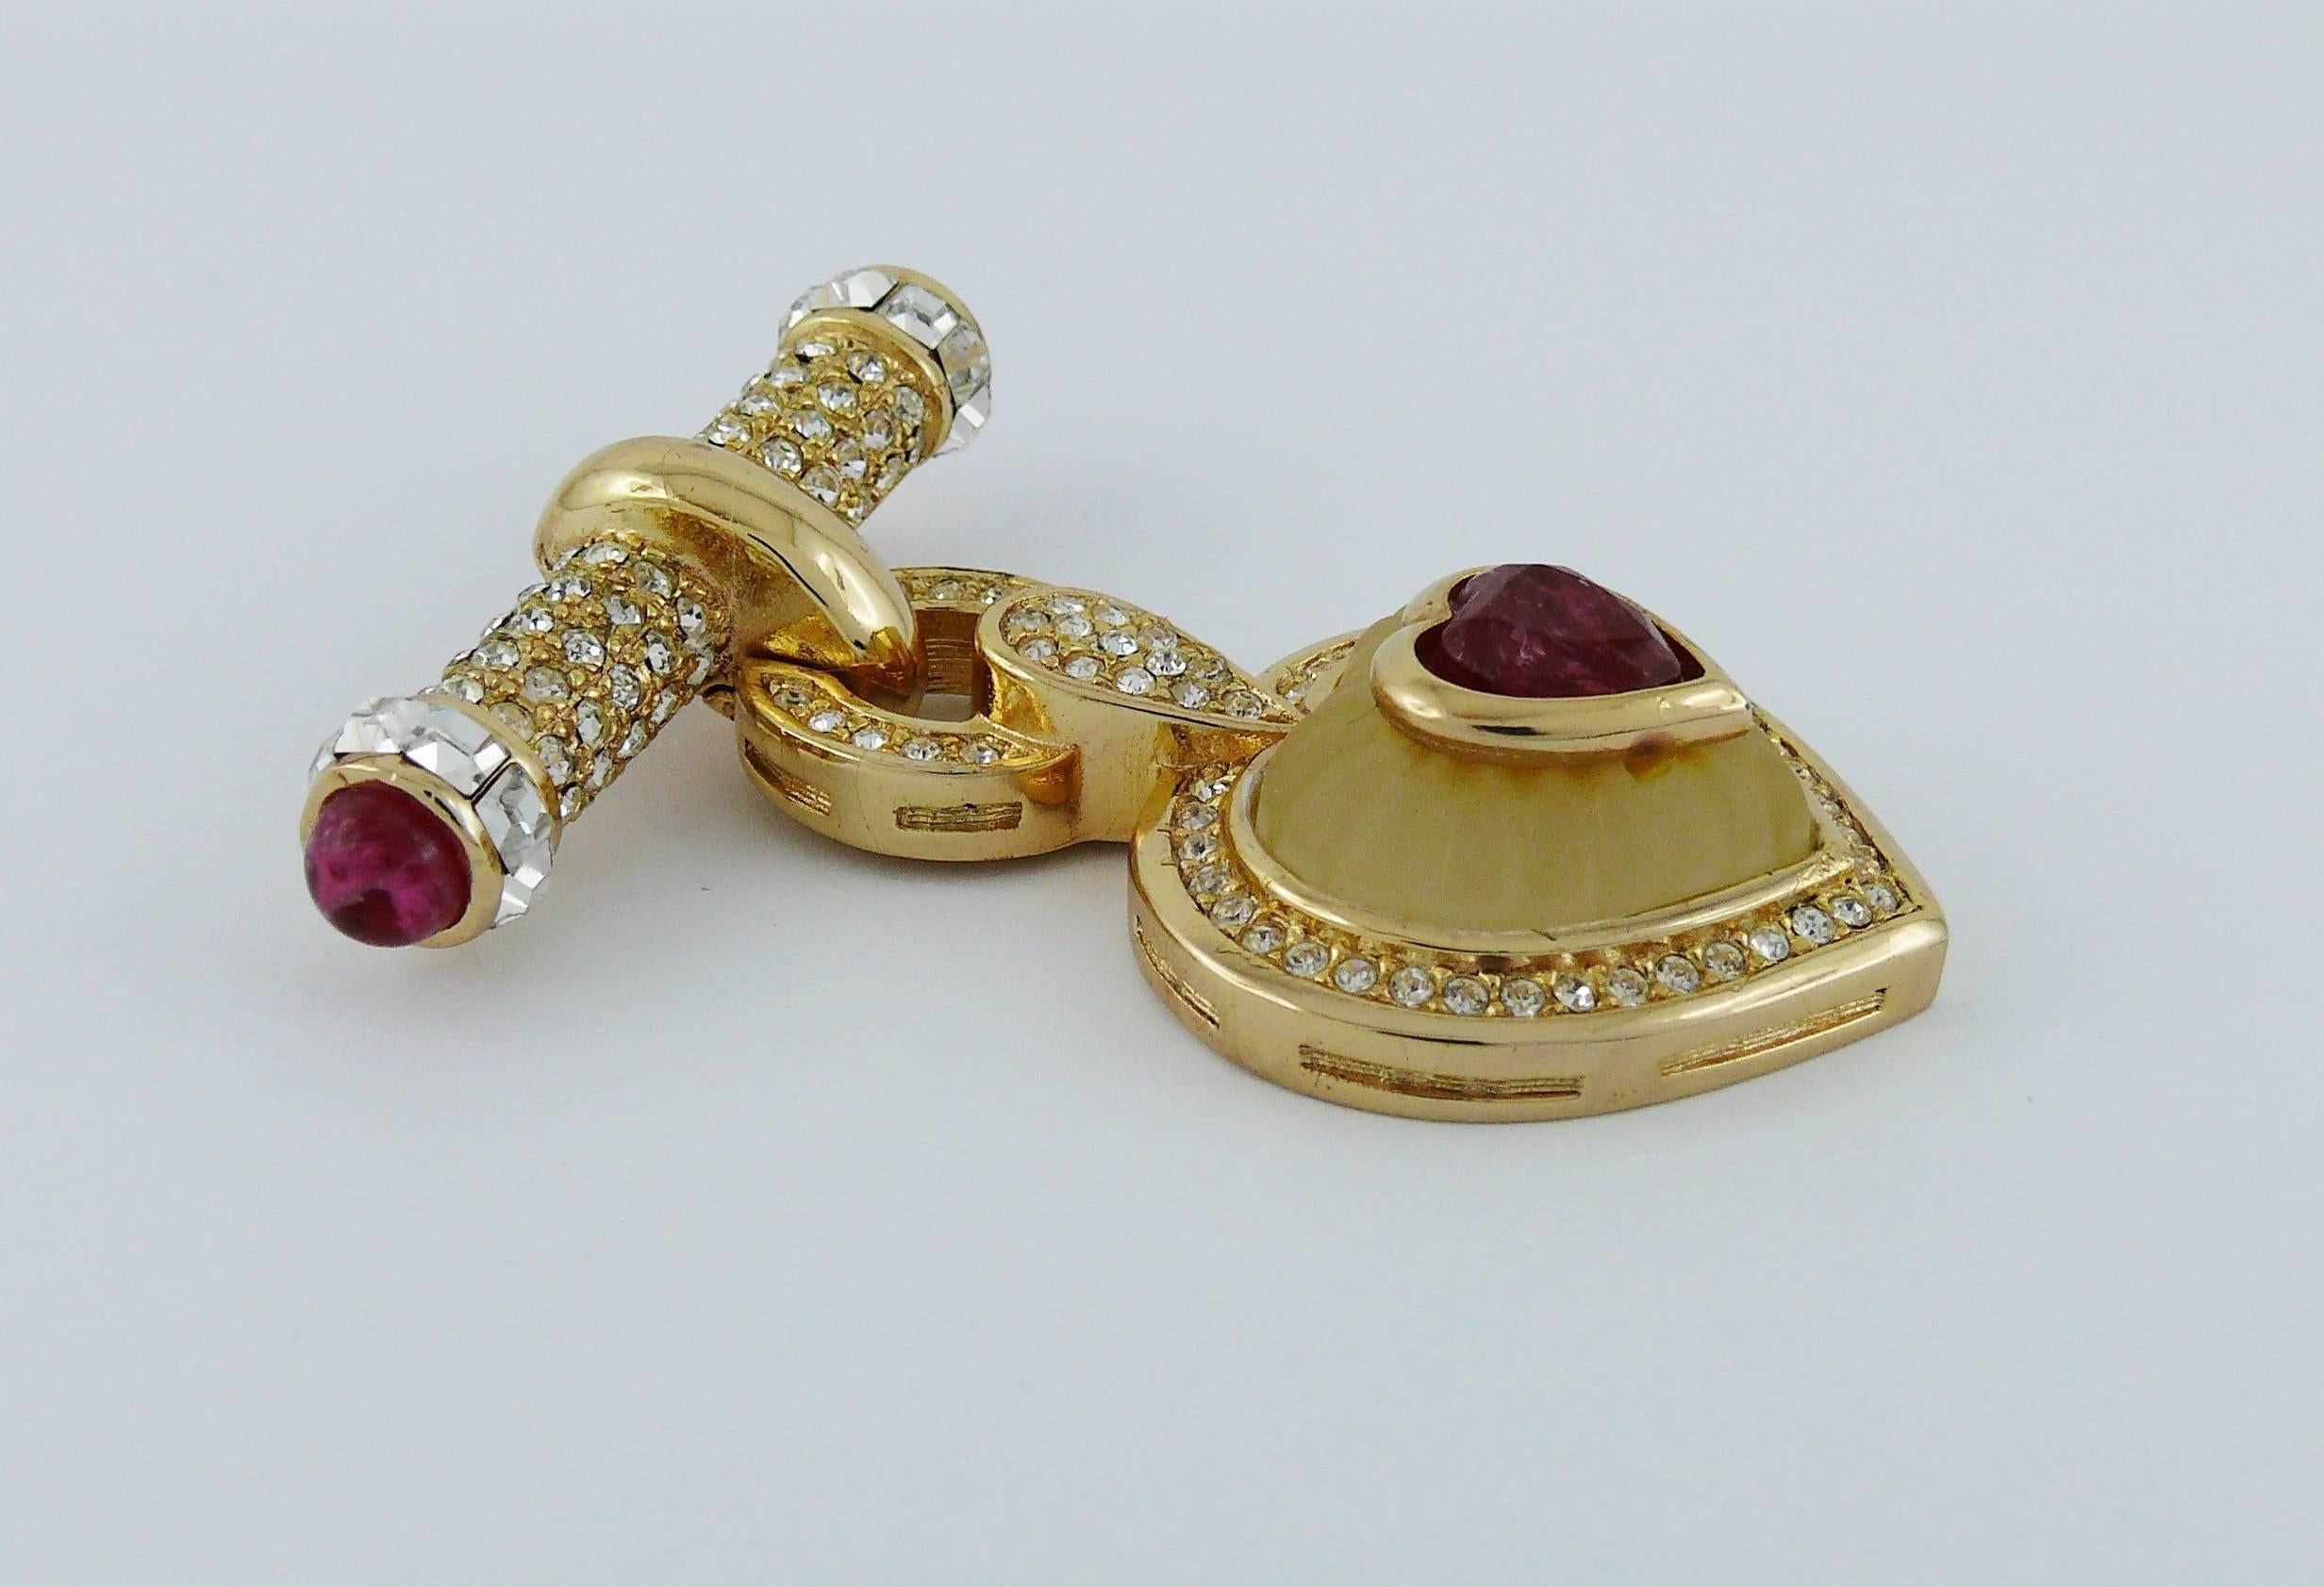 CHRISTIAN DIOR vintage gold toned heart dangle brooch with faux ruby glass stones and clear crystal embellishement.

Marked CHR. DIOR Germany.

Indicative measurements : length approx. 5.5 cm (2.17 inches) / max. width approx. 4.6 cm (1.81